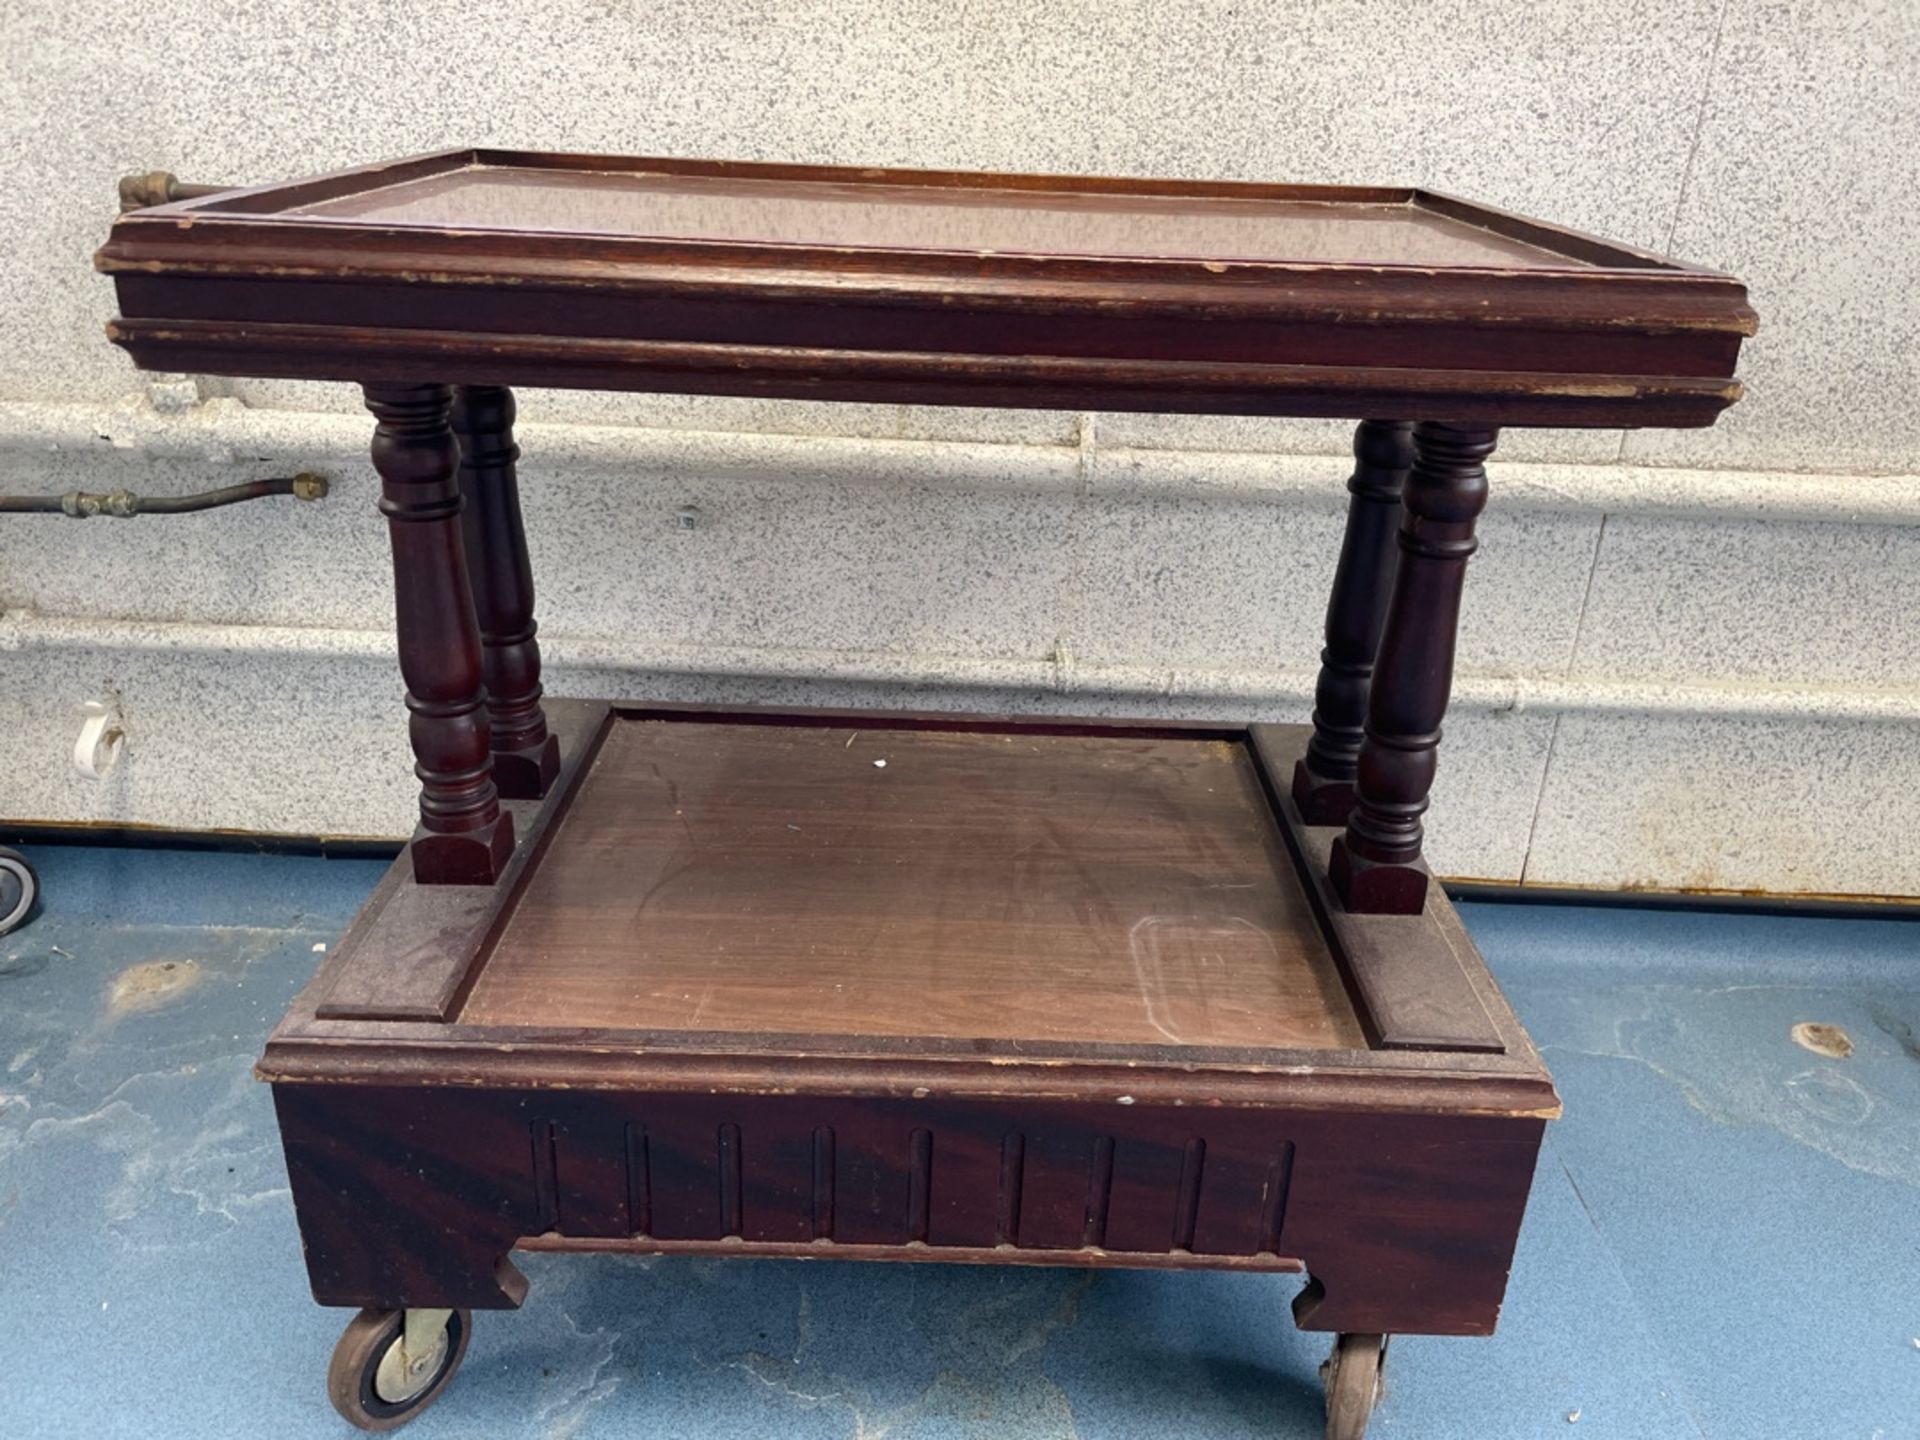 Wooden Hostess Trolley - Image 2 of 2